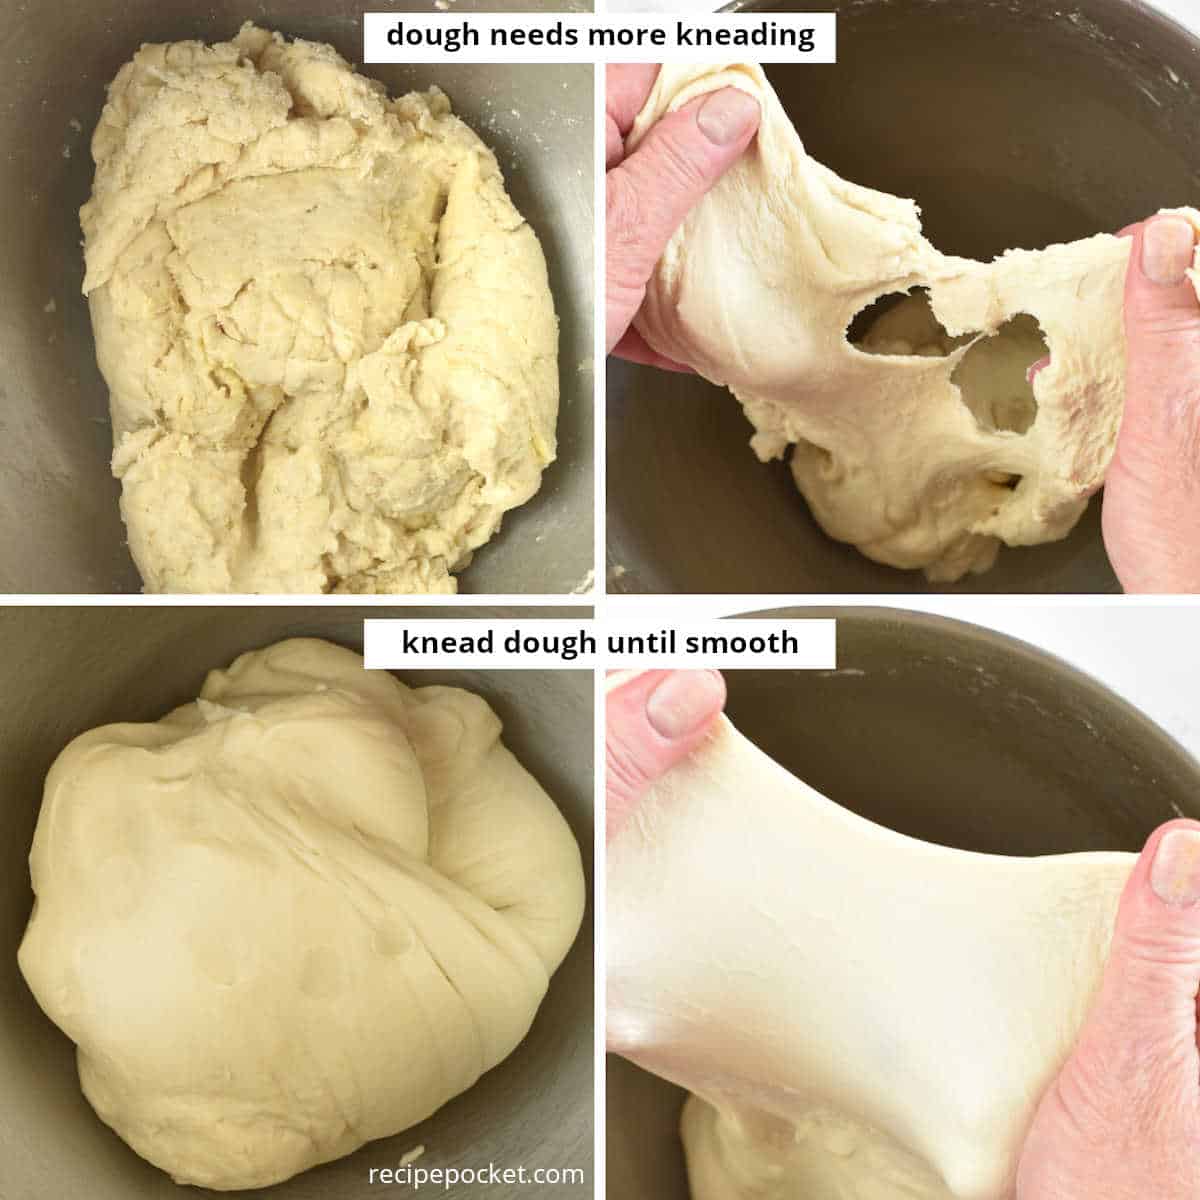 Picture showing how the bread dough looks before and after kneading.